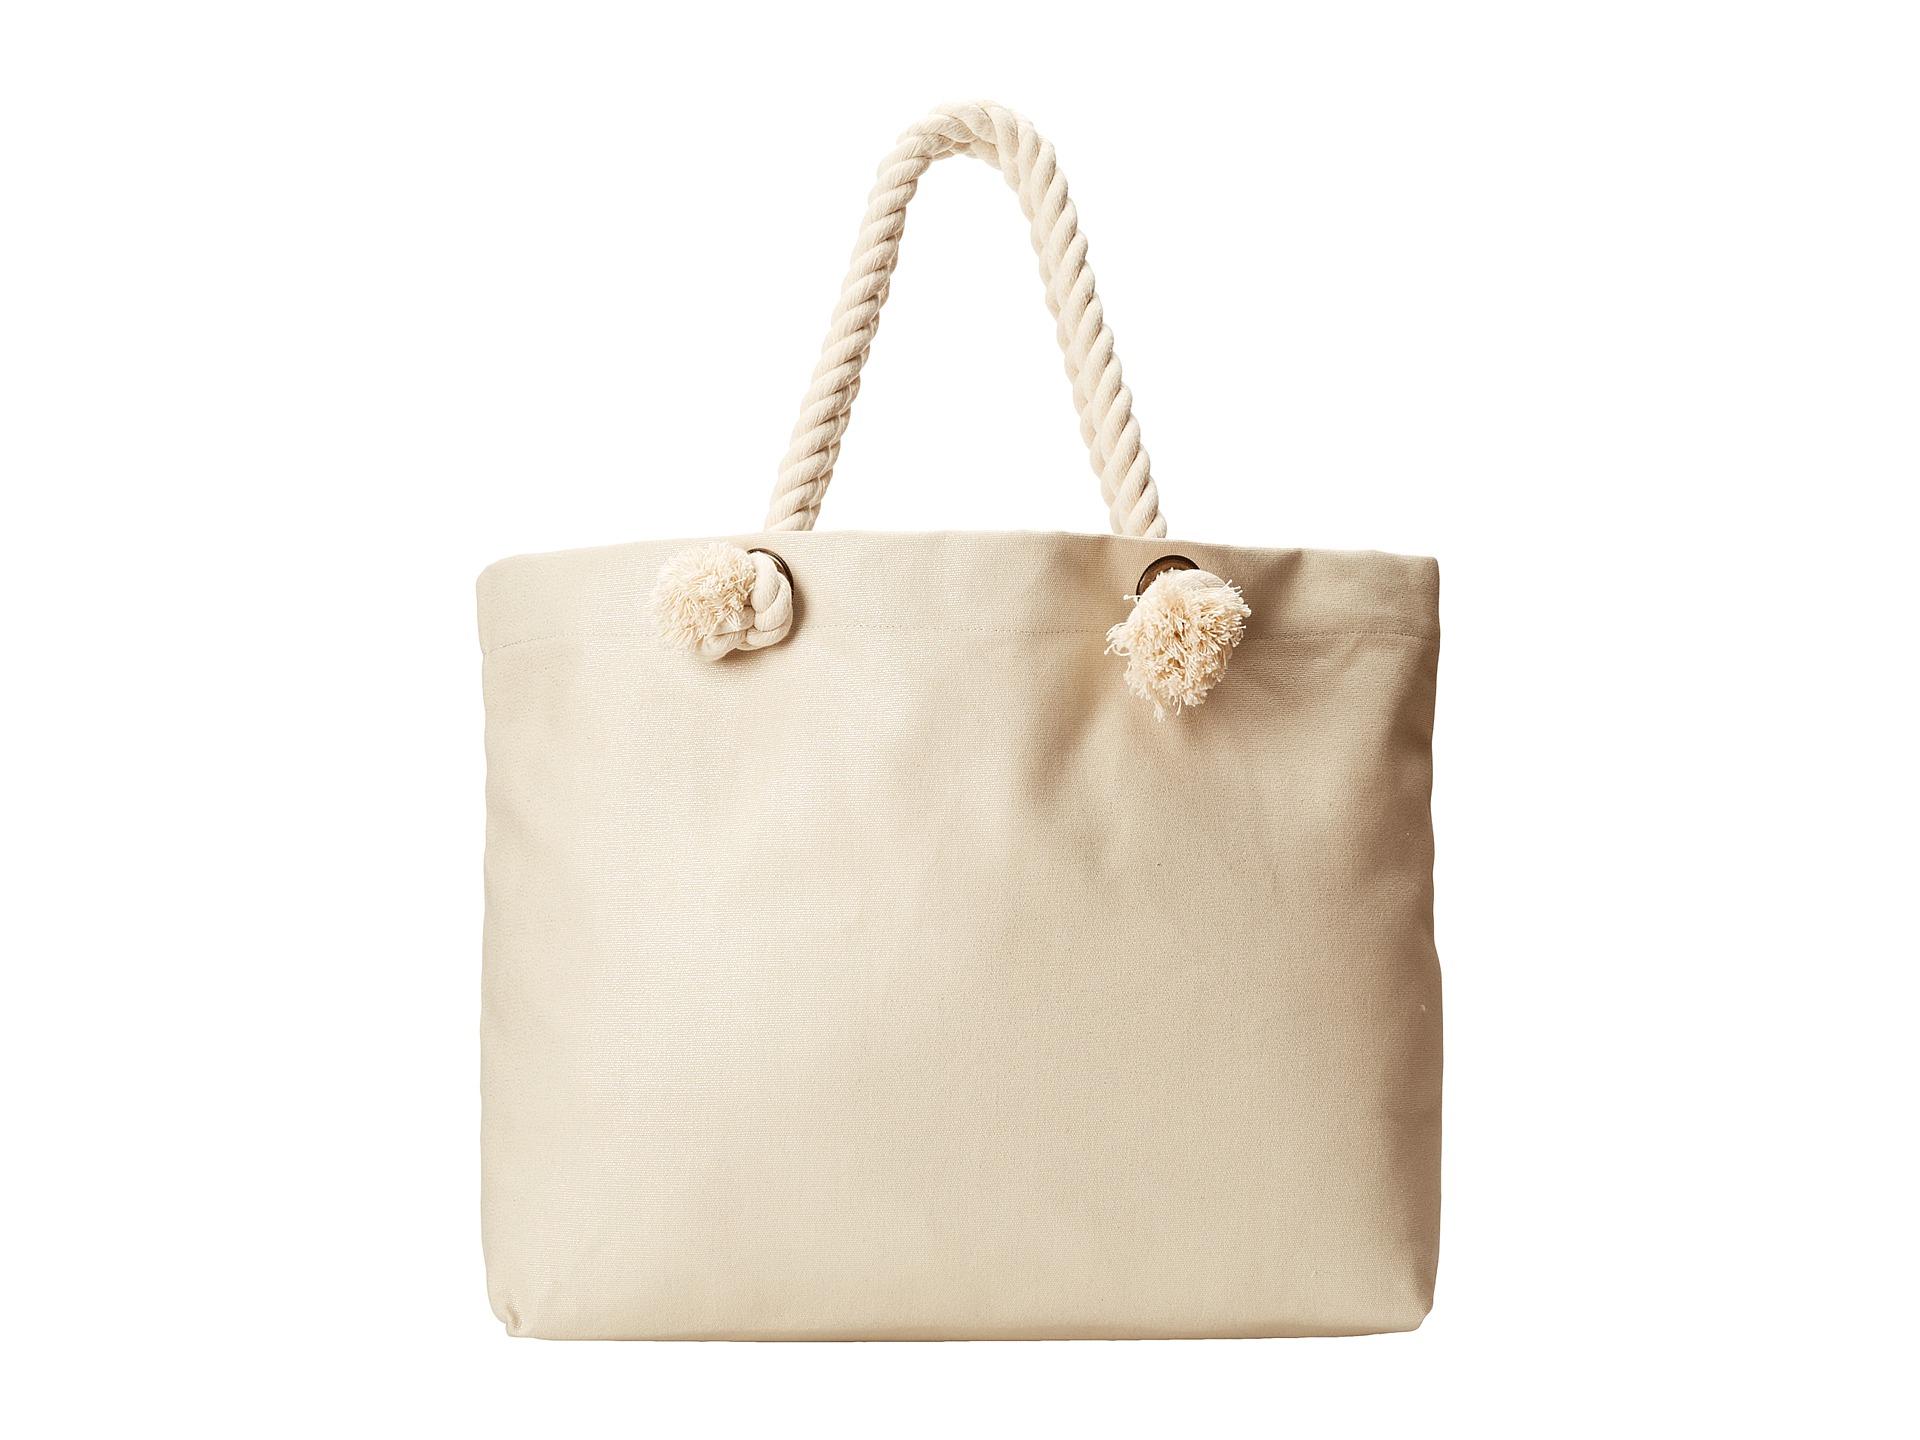 Hat Attack Perfect Canvas Beach Tote w/ Rope Handles - Zappos.com Free ...